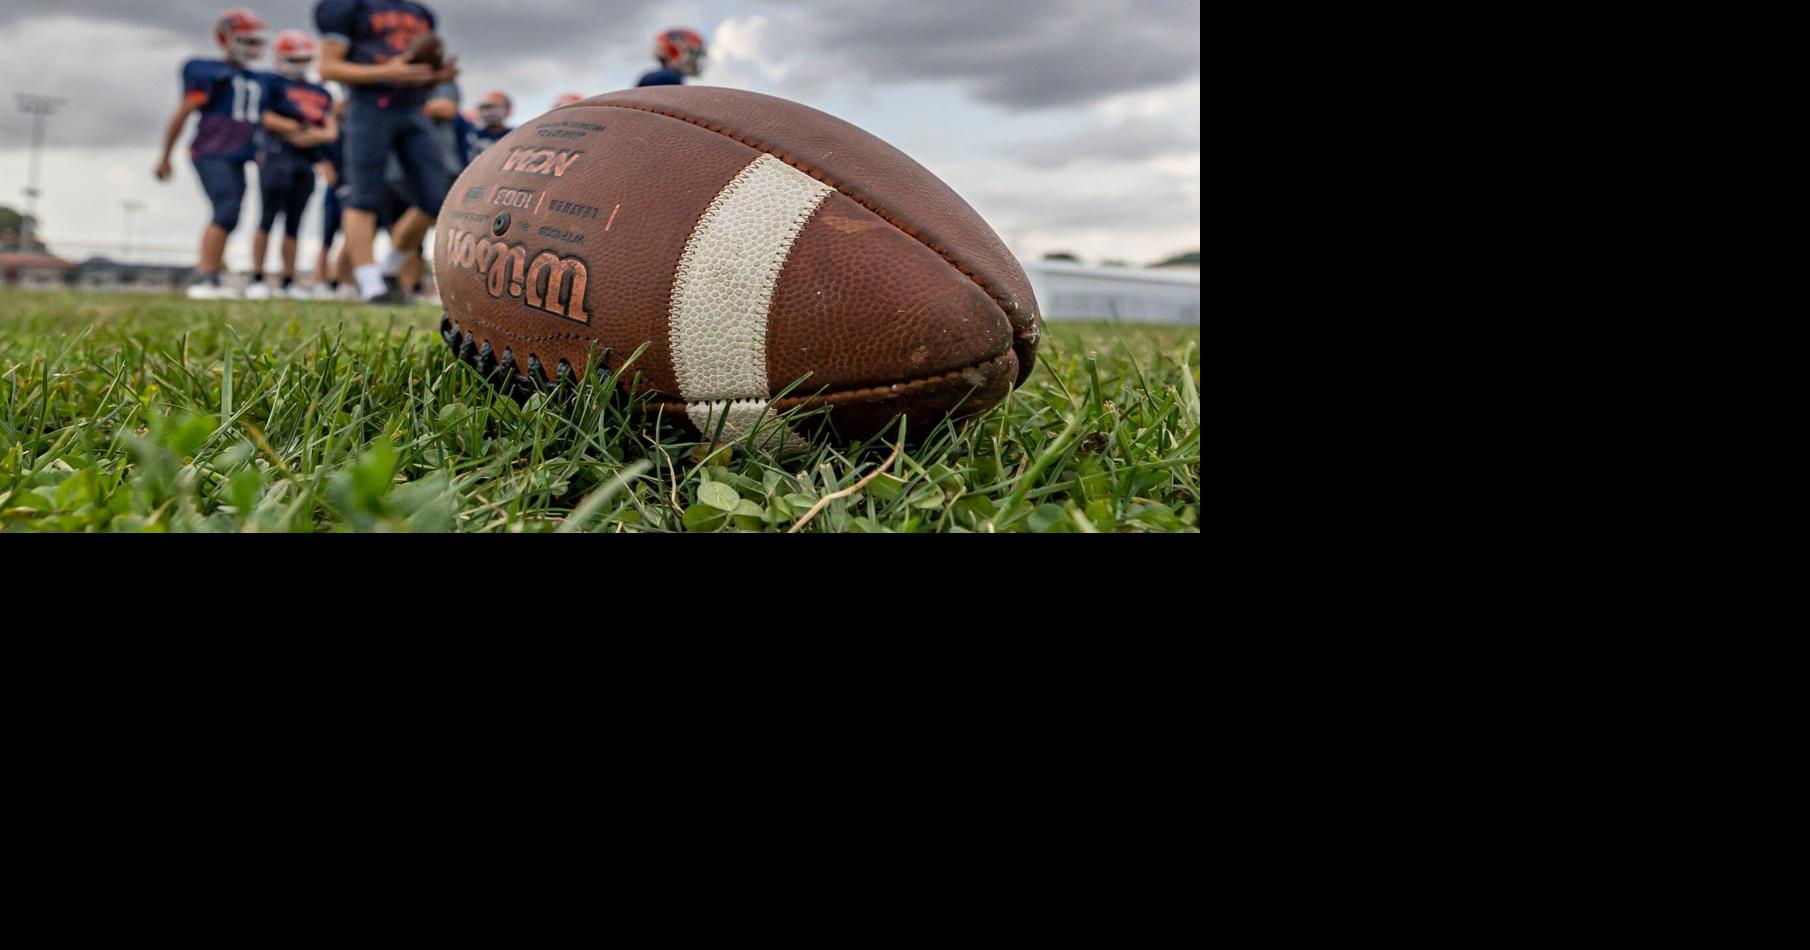 Live Week 3 score updates from throughout the Central Illinois area